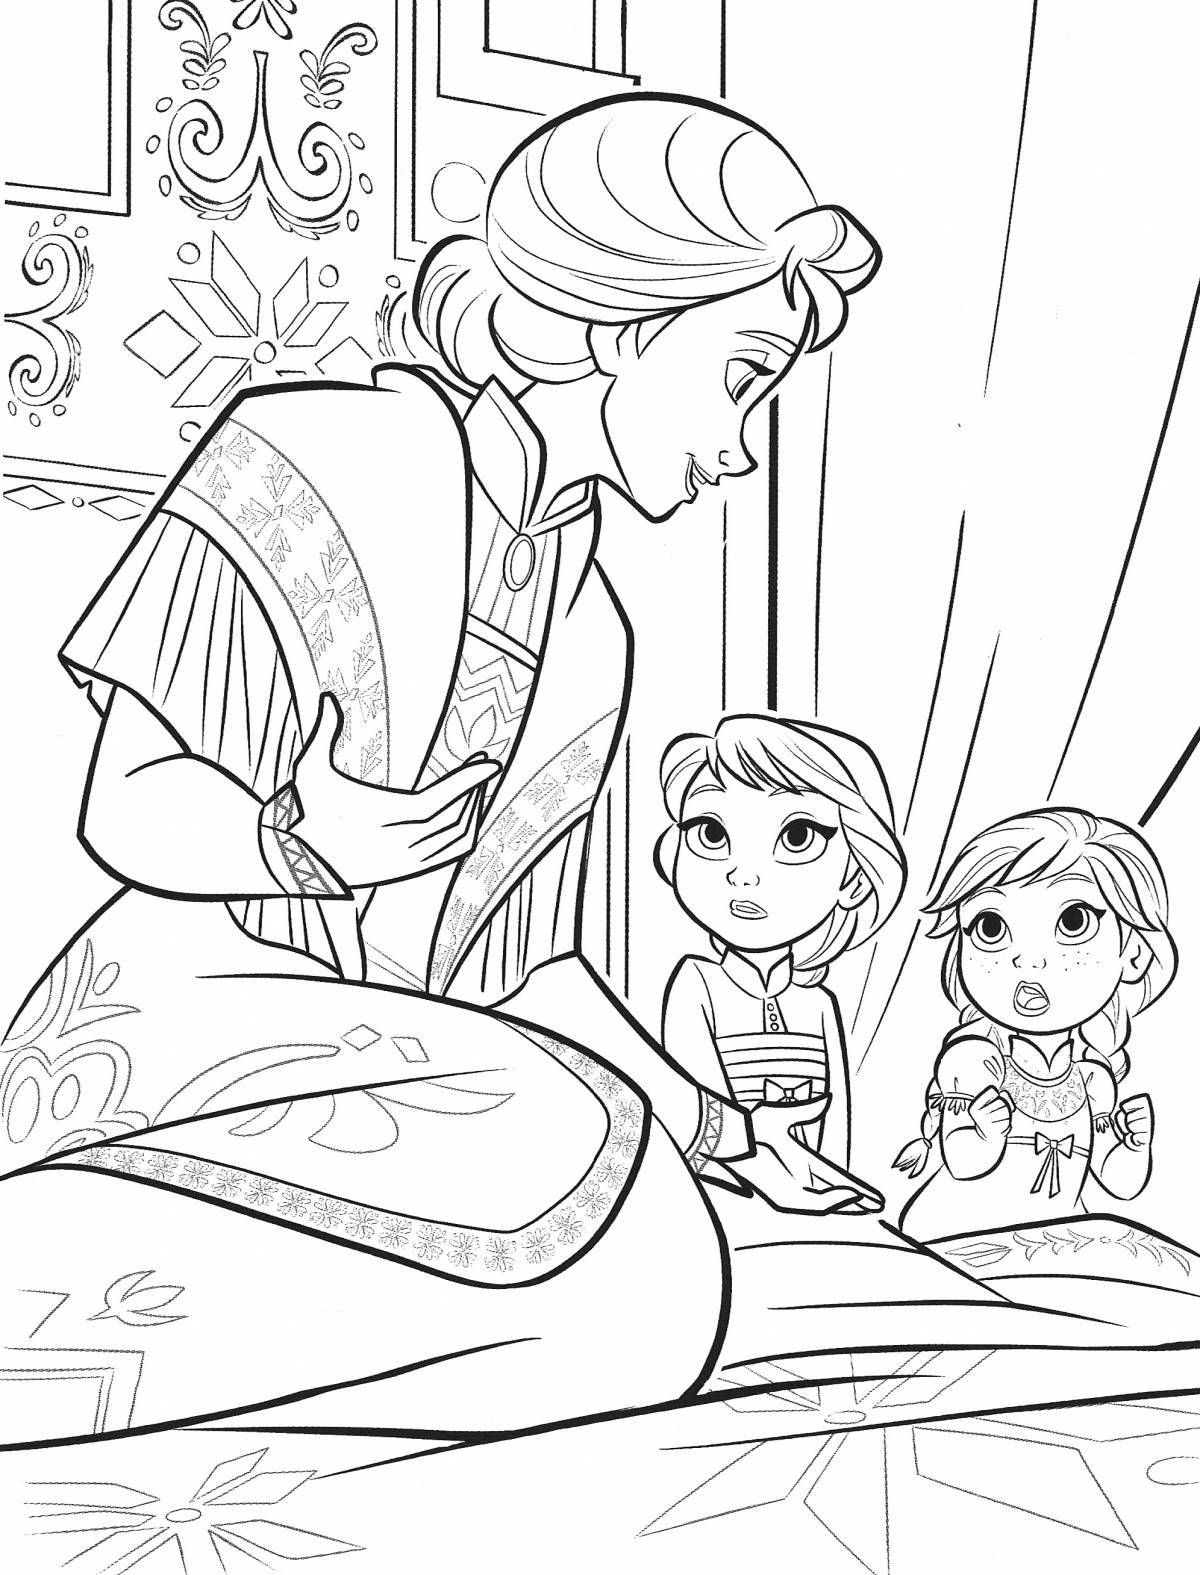 Elsa and anna for kids #2